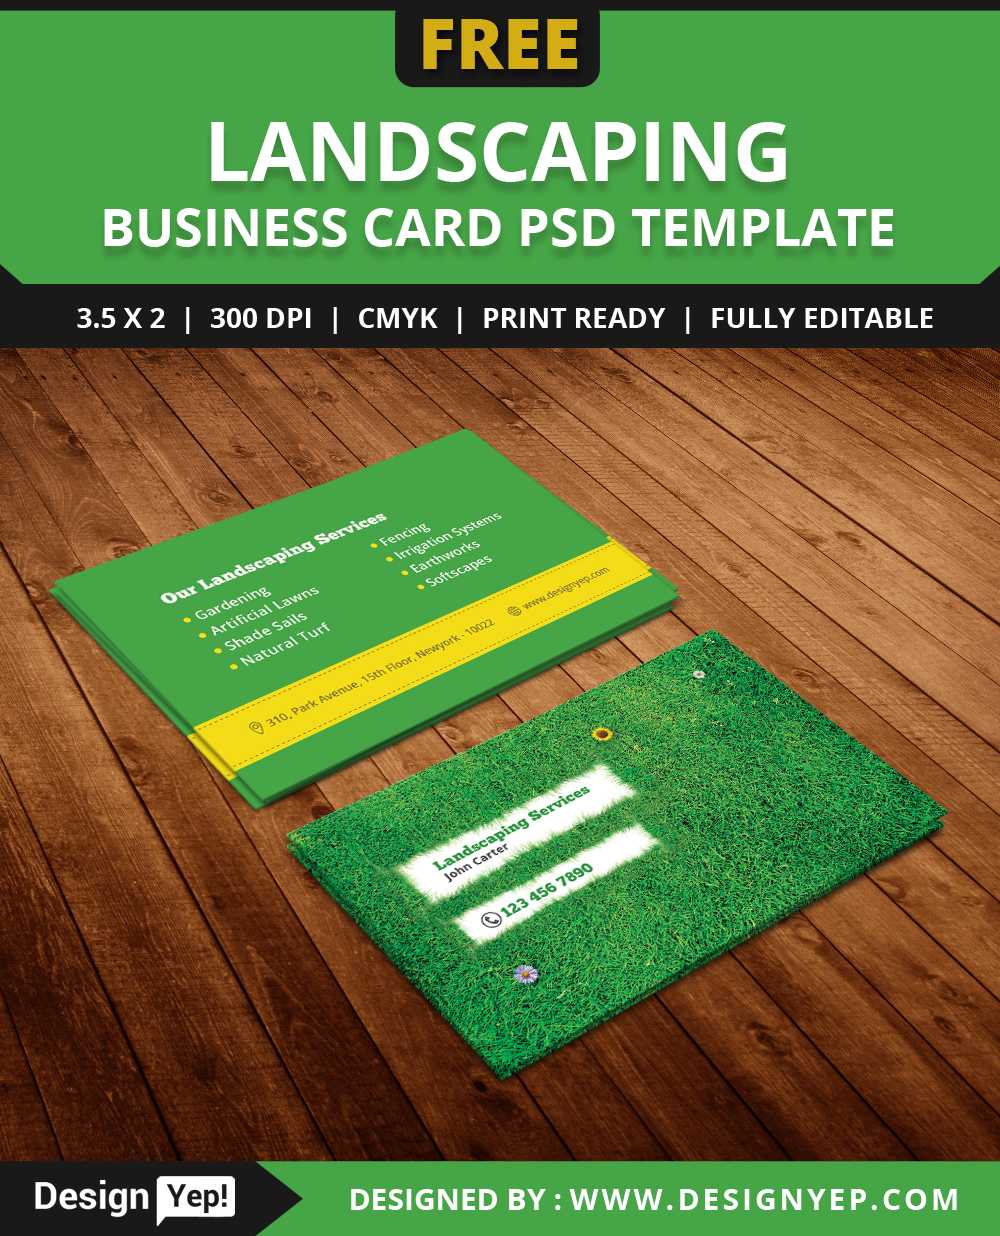 Free Landscaping Business Card Template Psd – Designyep In Gardening Business Cards Templates